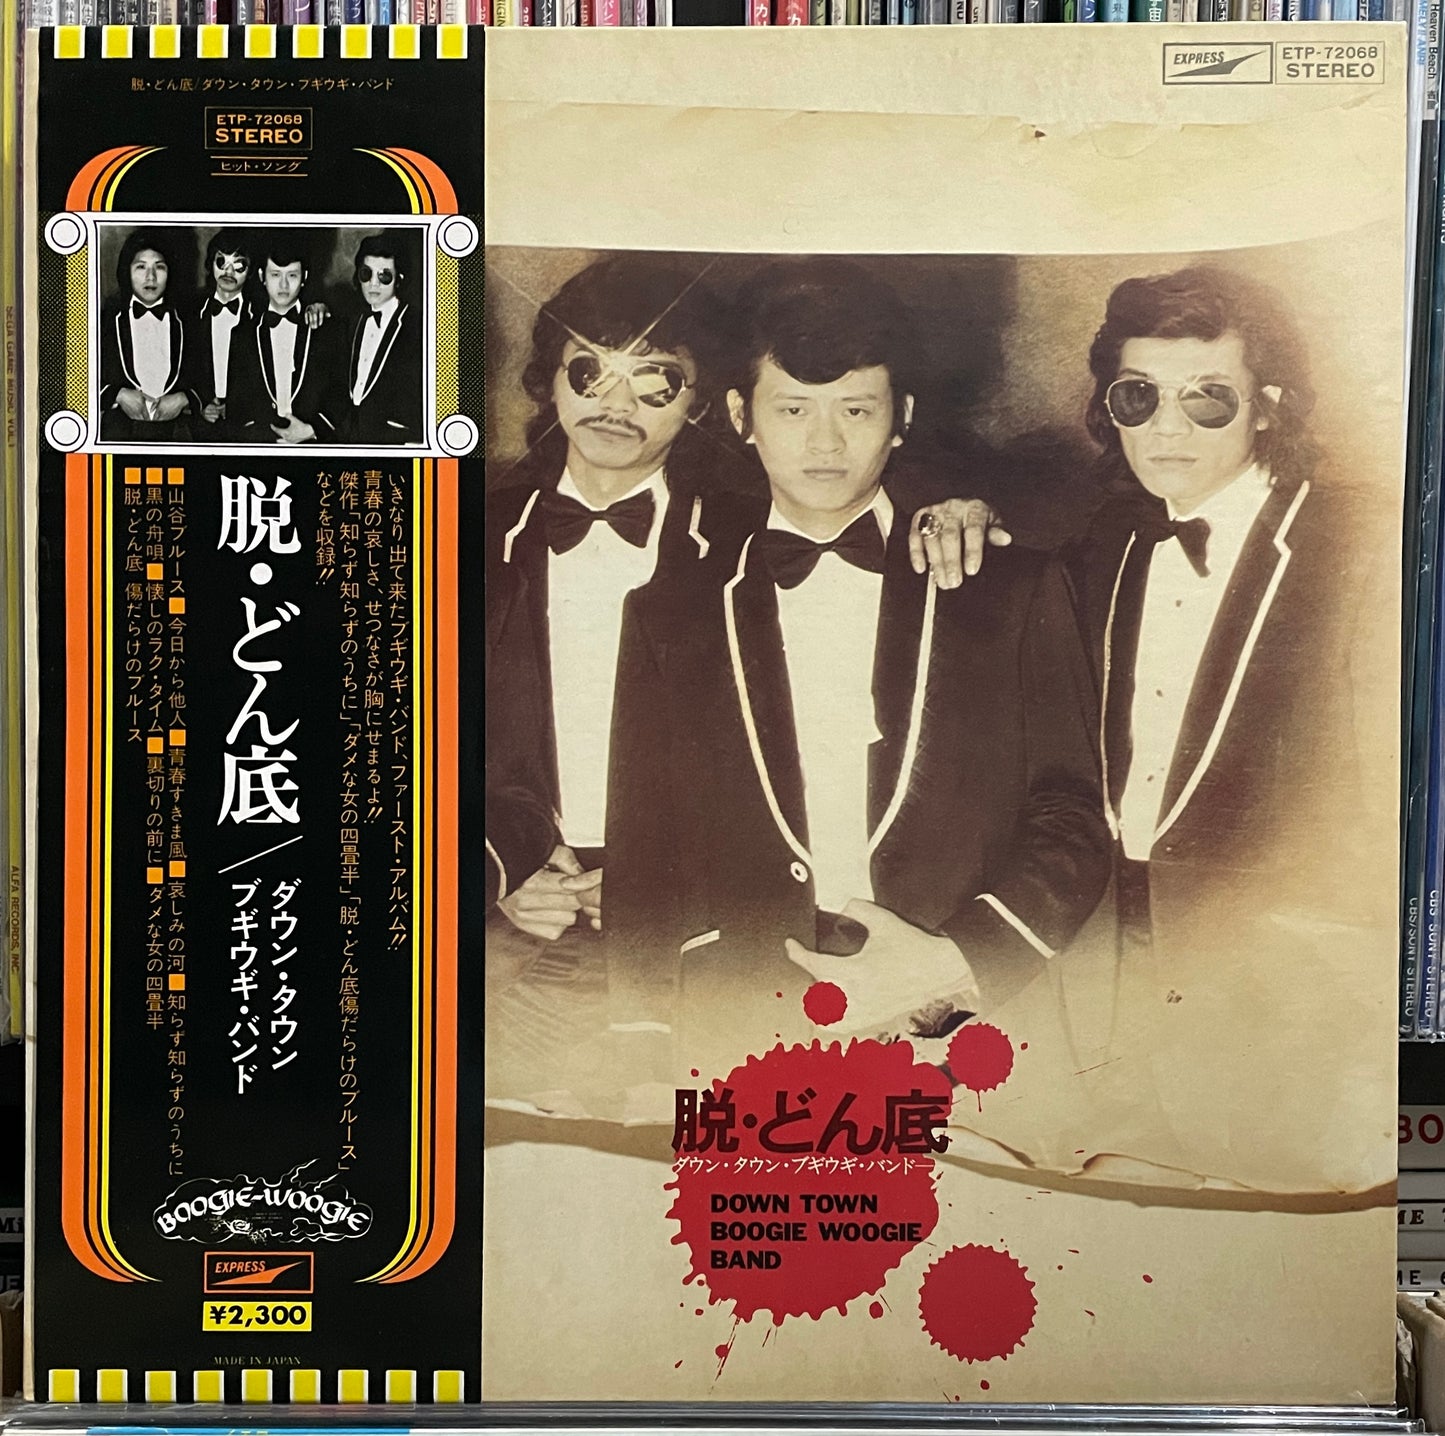 Down Town Boogie-Woogie Band "脱・どん底" (1975)